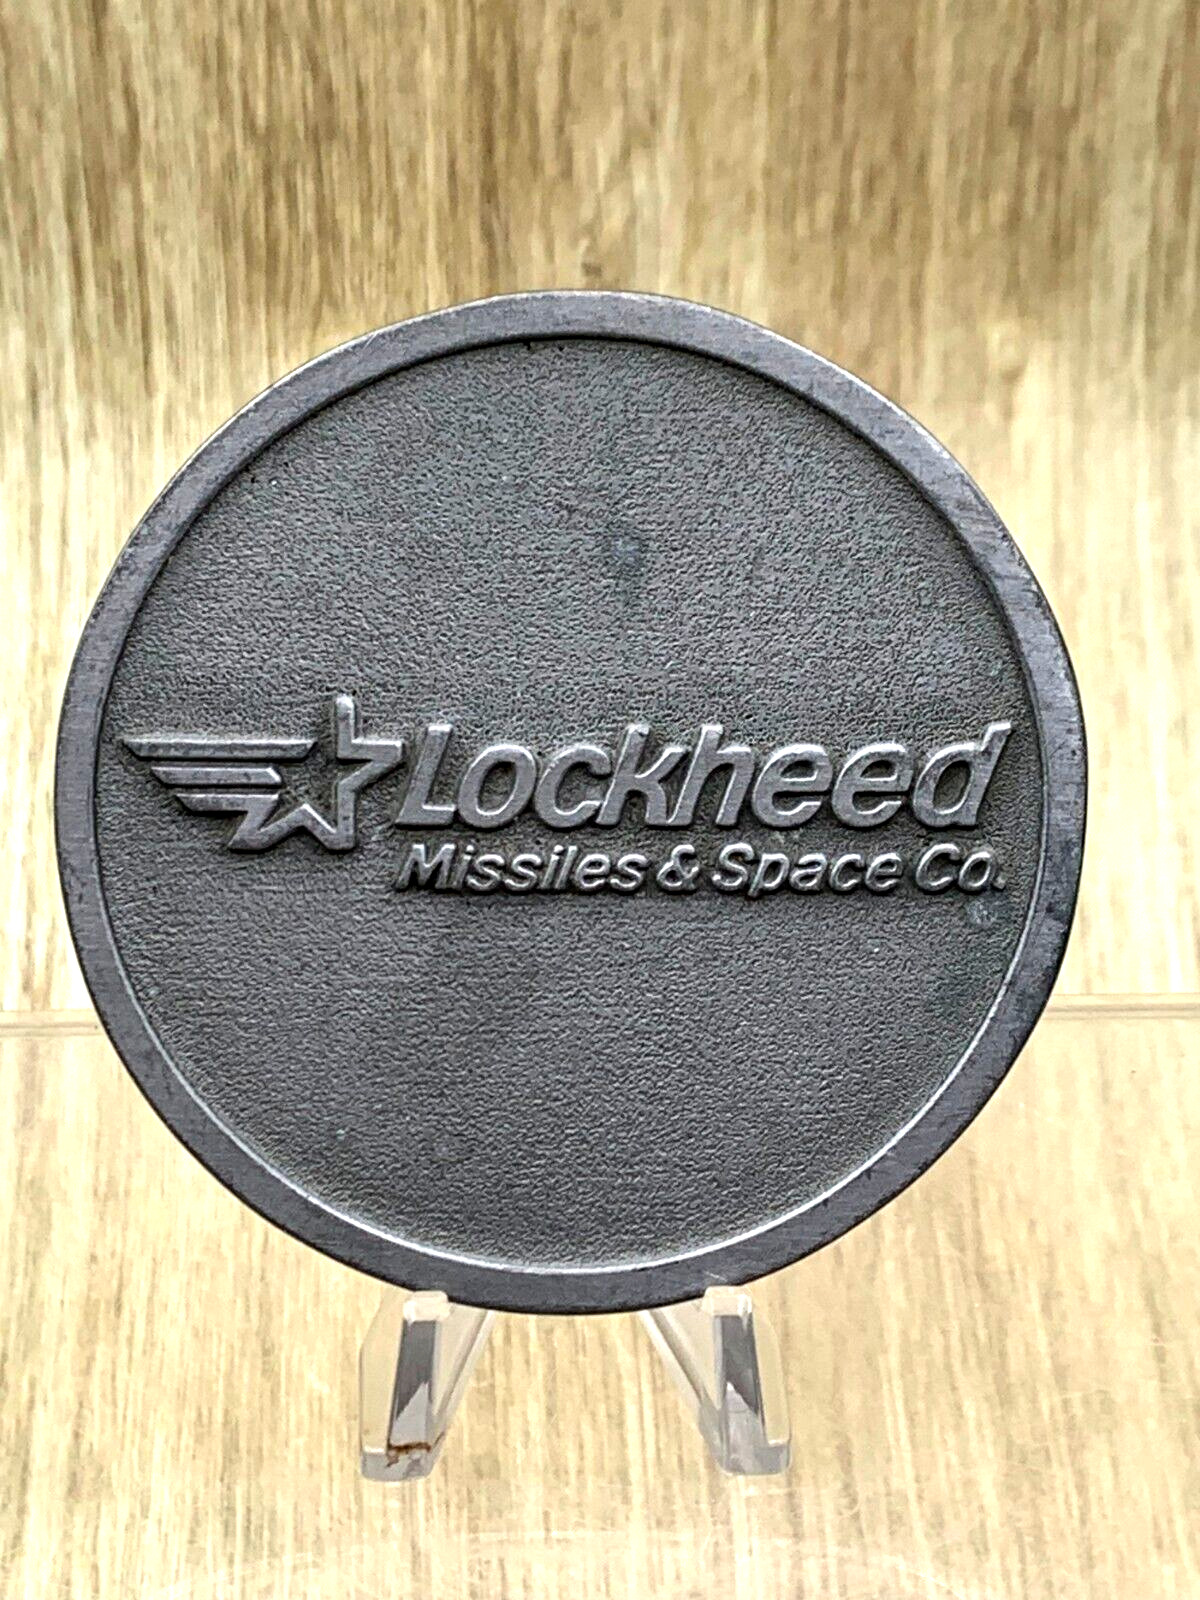 Vintage Lockheed Missile and Space Co Paperweight Aerospace Defense